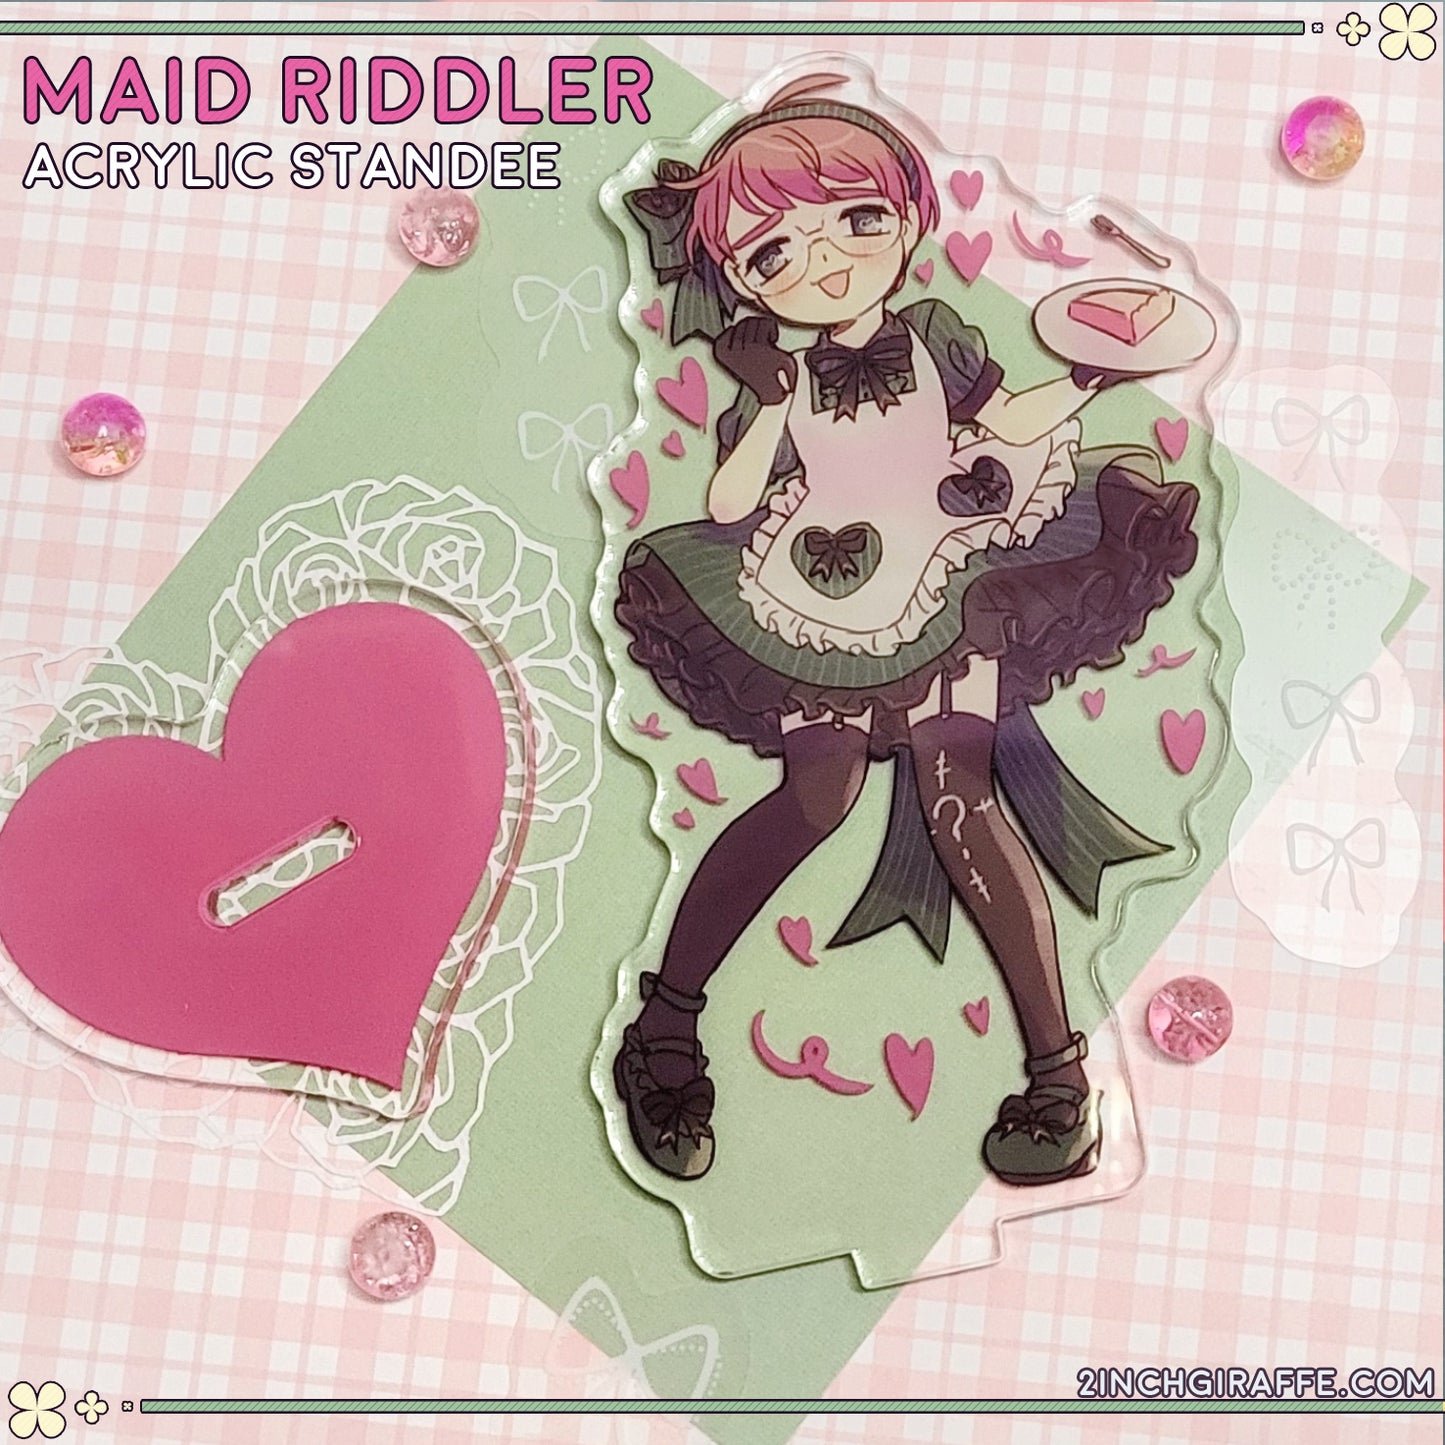 Maid Riddler Acrylic Standee